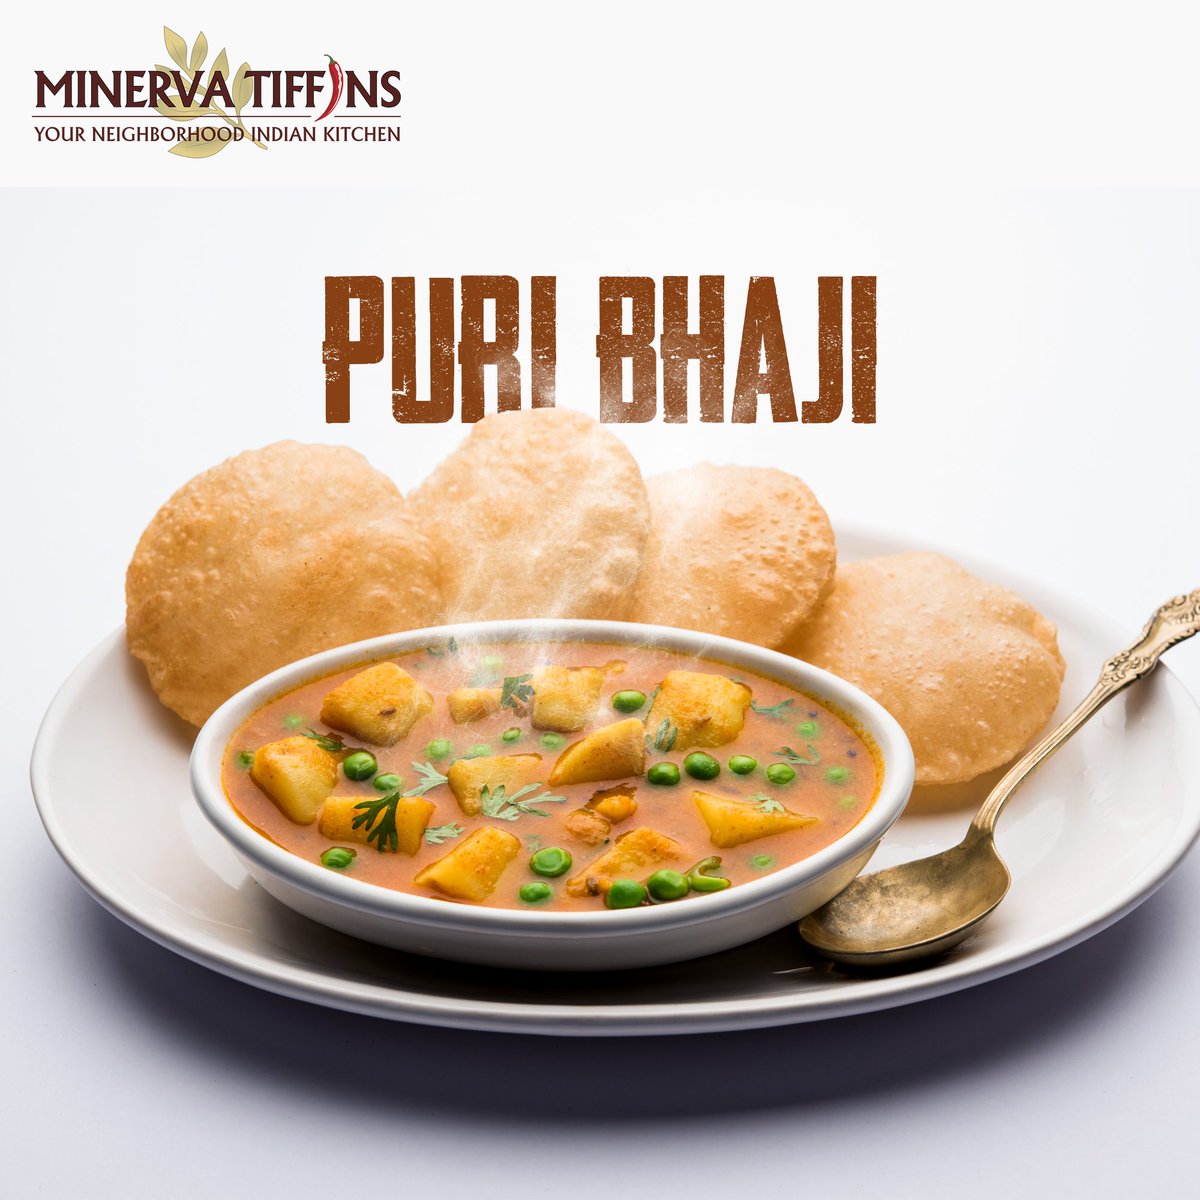 Get ready to dive into a plate full of deliciousness that will transport you to the streets of India.
Visit📍16 Lebovic Ave, Scarborough, ON M1L 4V9
.
.
.
#minervatiffins #minerva #minervafoods #cateringservice #dinein #puribhaji #bhajipuri #breakfast #southindianbreakfast💁🏻🇮🇳 🇨🇦